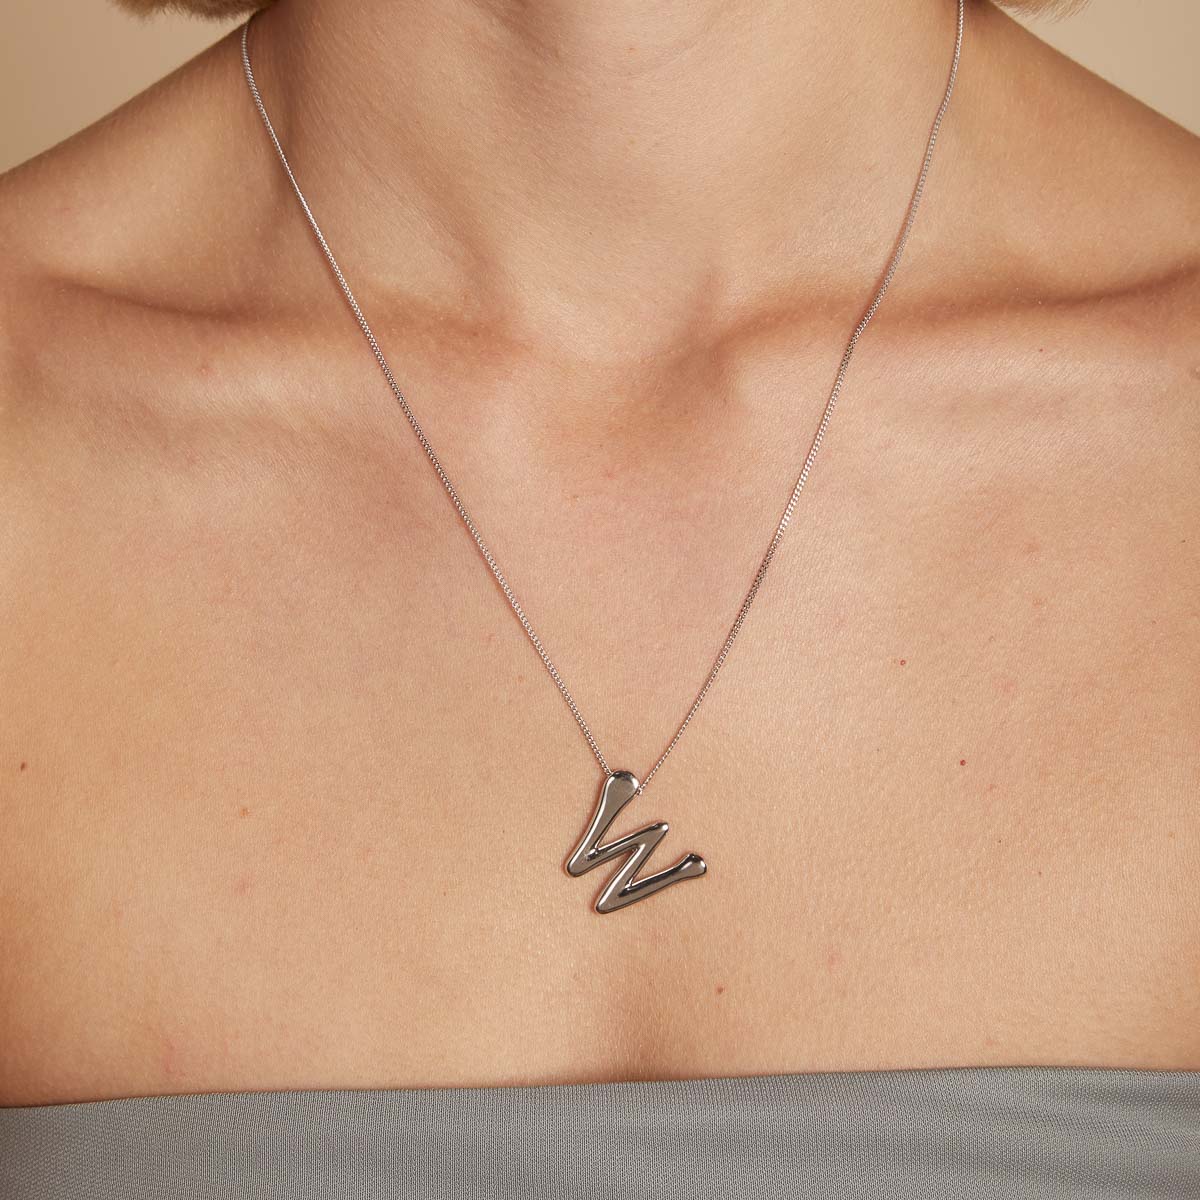 W Initial Bold Pendant Necklace in Silver